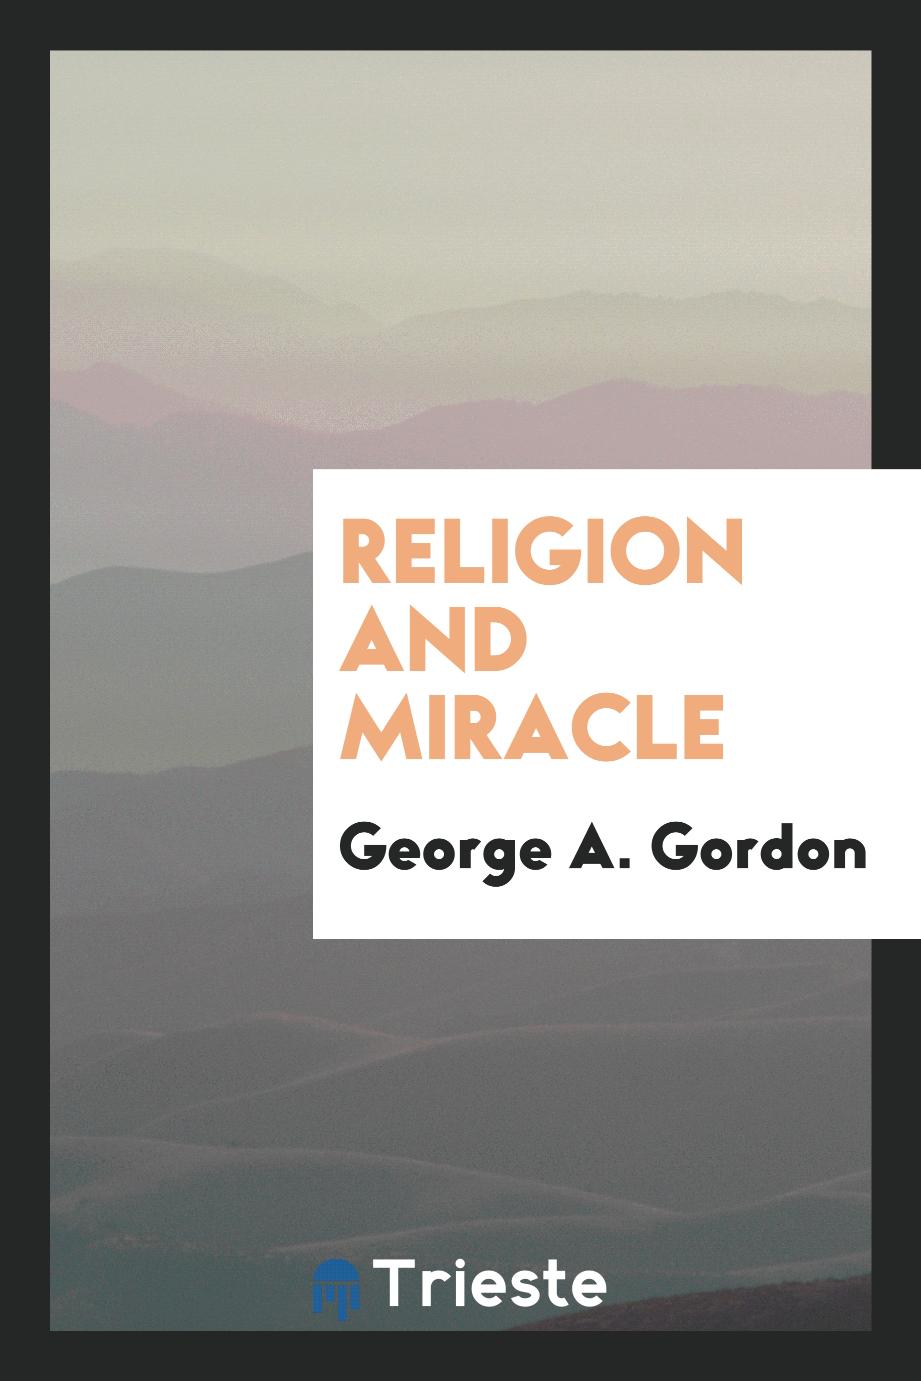 Religion and miracle